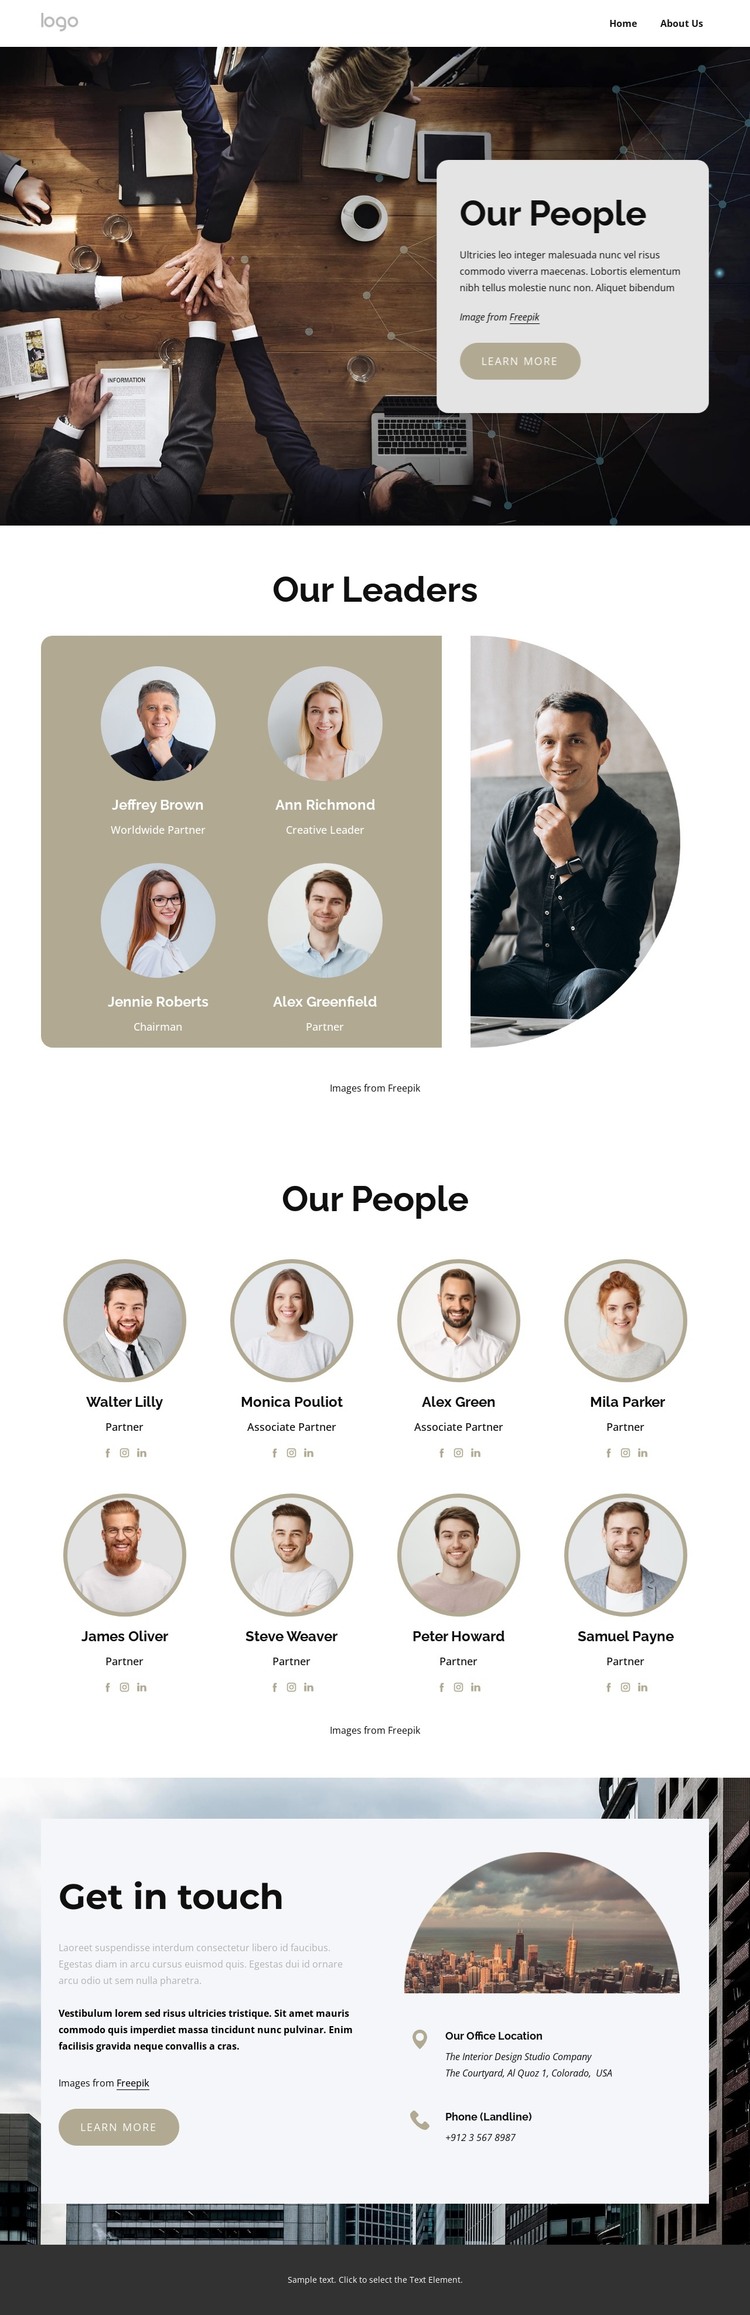 We believe our people deserve rewards HTML Template